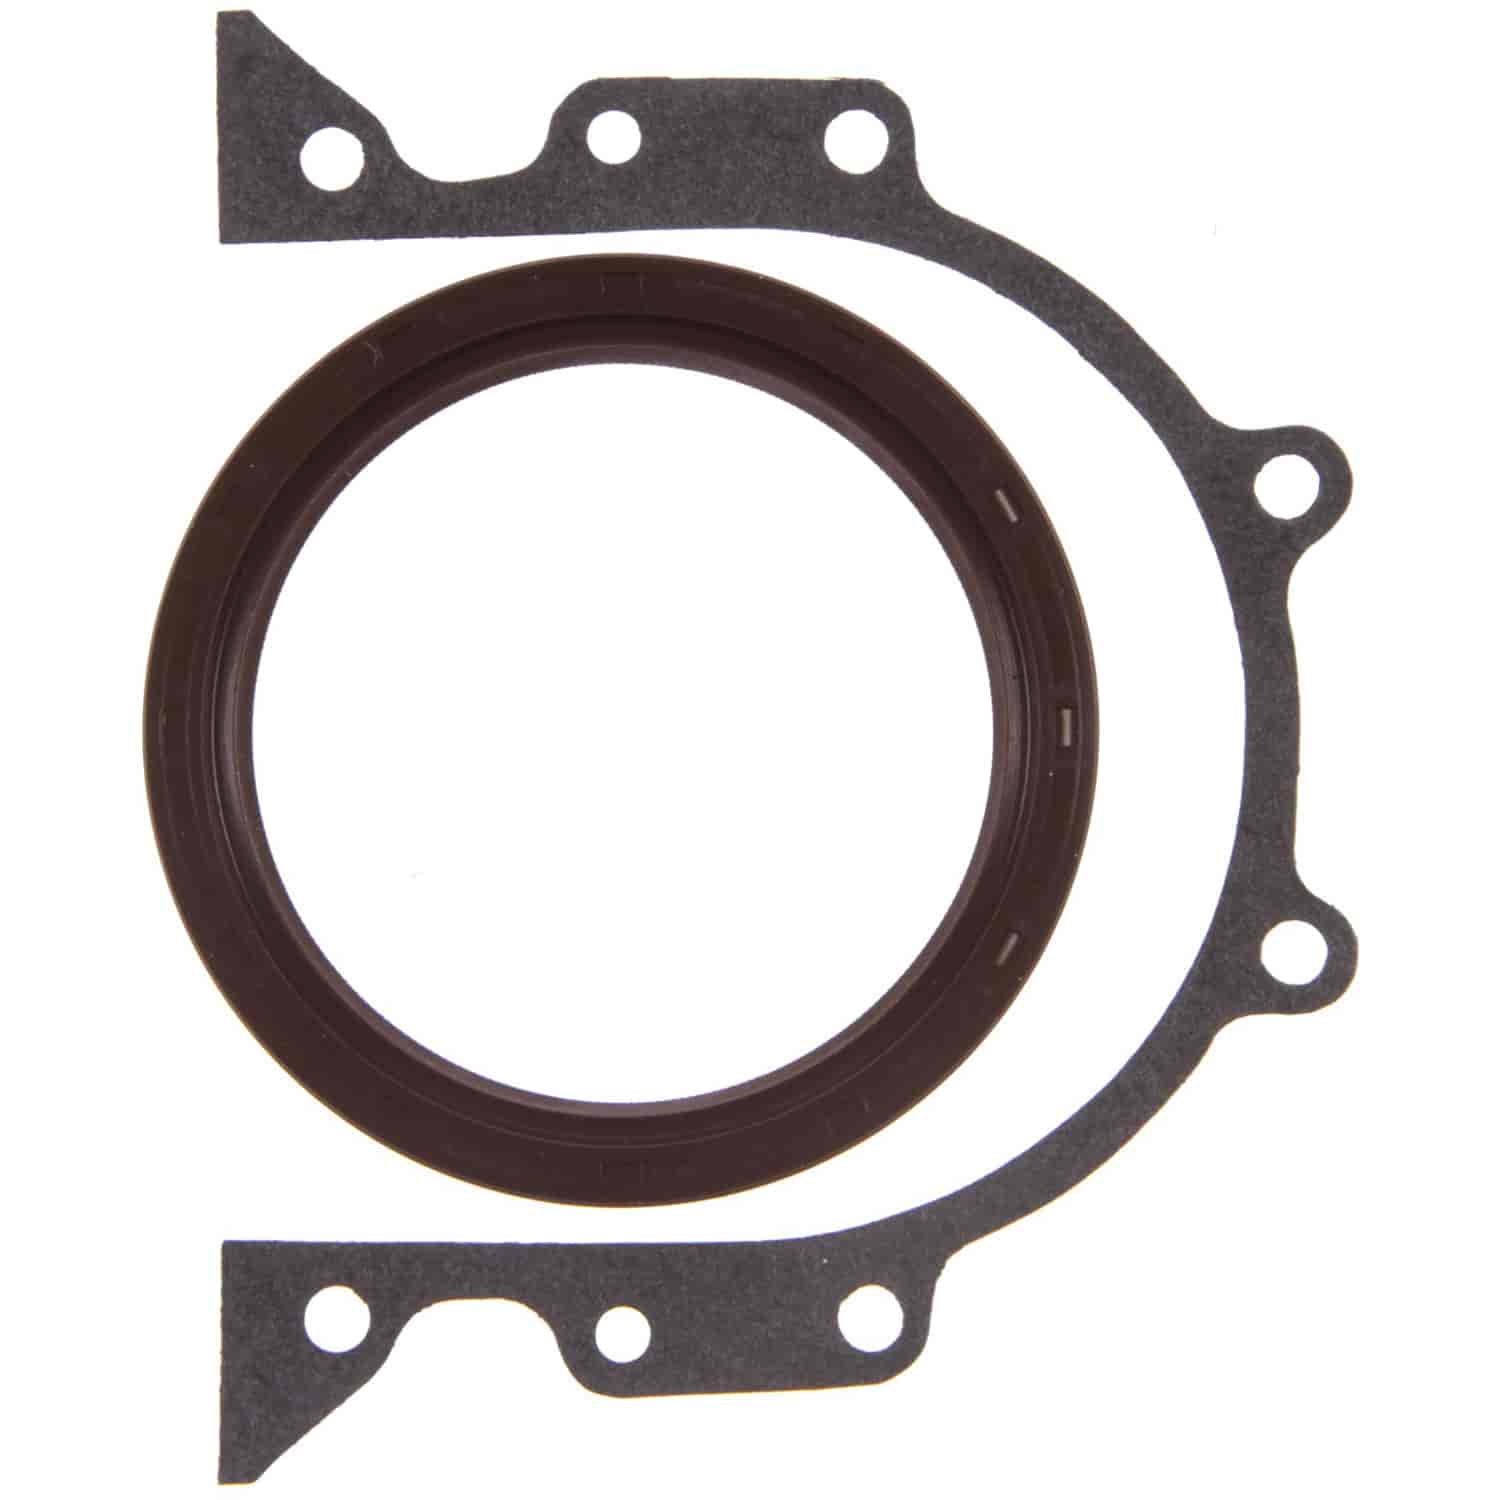 Rear Main Seal Set Toyota Camry Celica w/1995cc 1998c Engs. 83-89